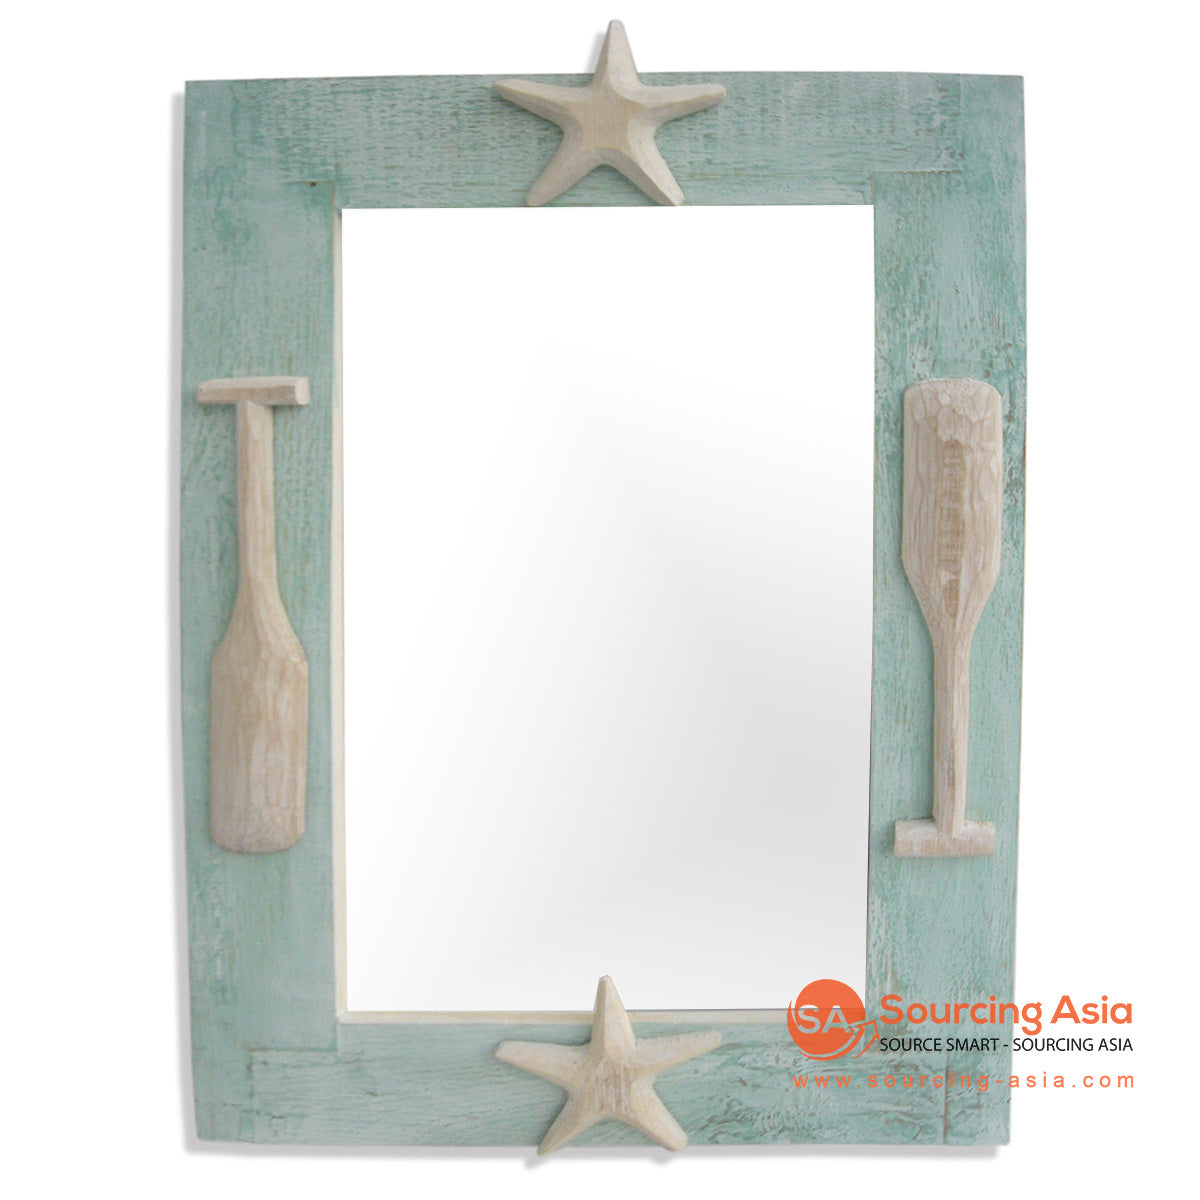 SKB014GR-60 GREEN AND LIGHT WHITE WASH WOODEN FRAME WITH PADDLES AND STARFISH ORNAMENT